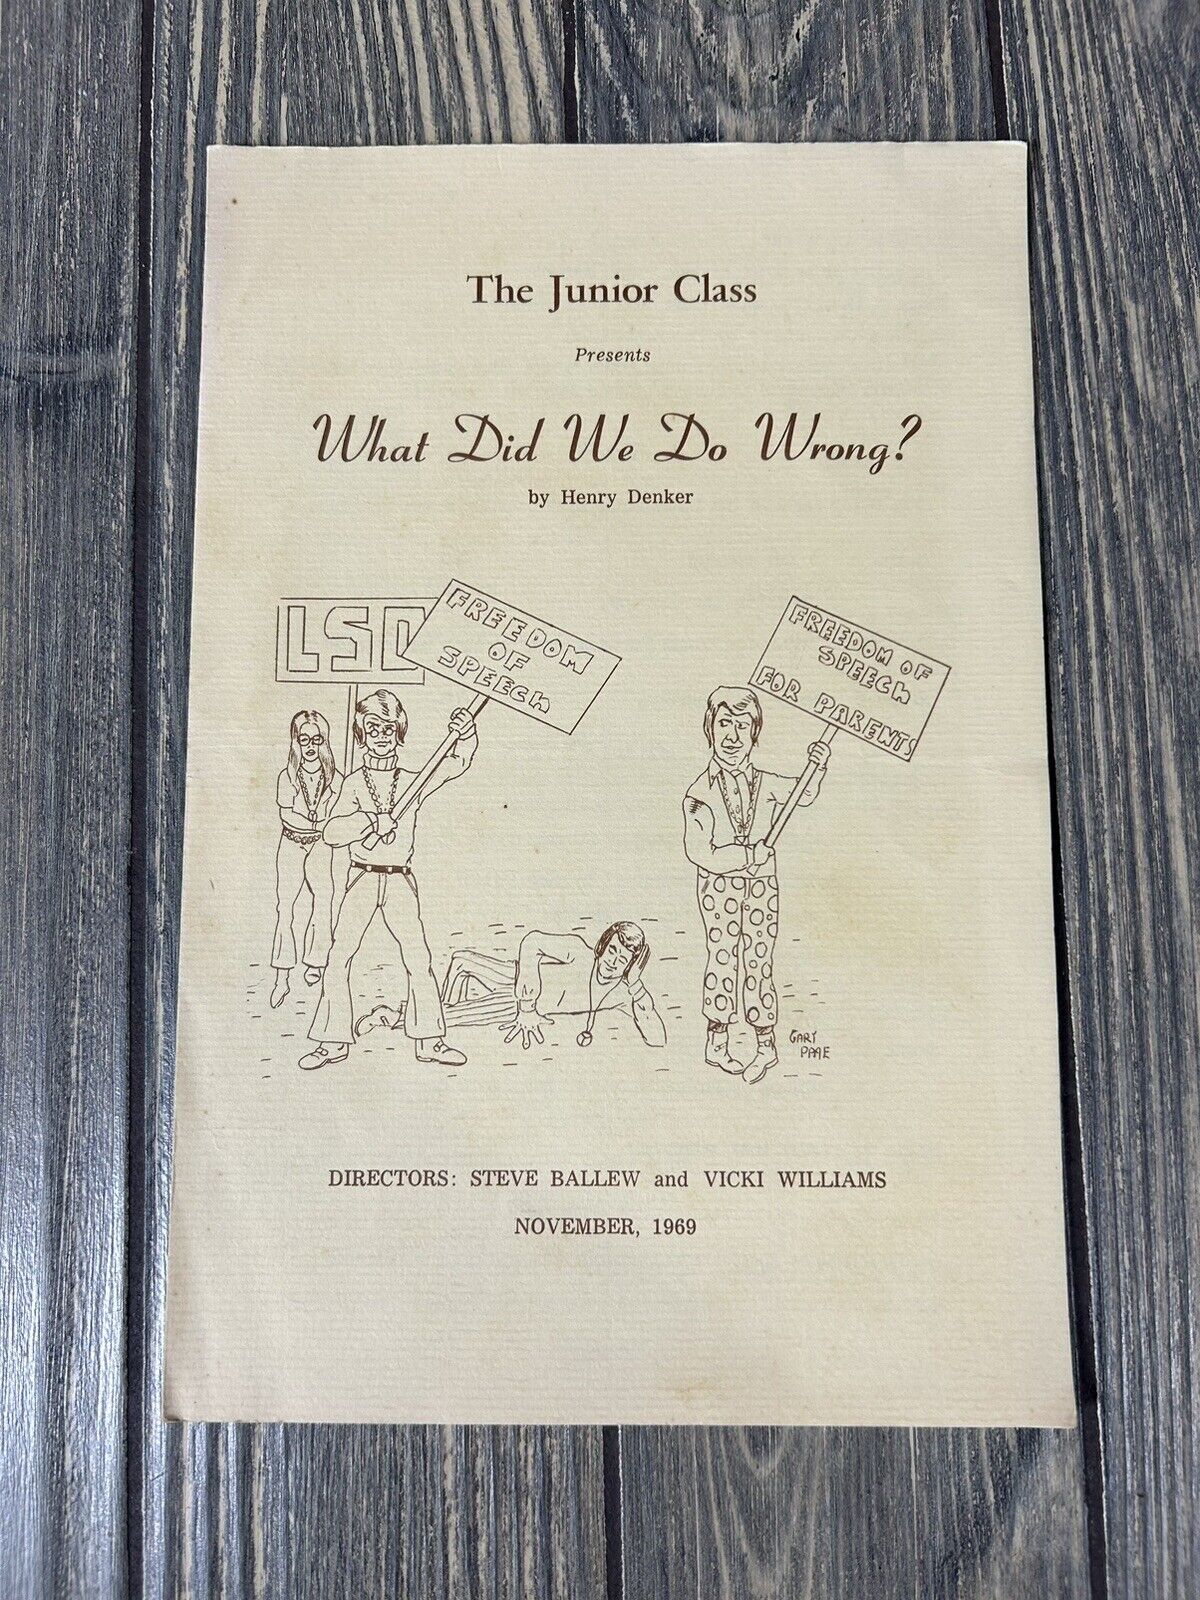 Vintage November 1969 The Junior Class Presents What Did We Do Wrong Program